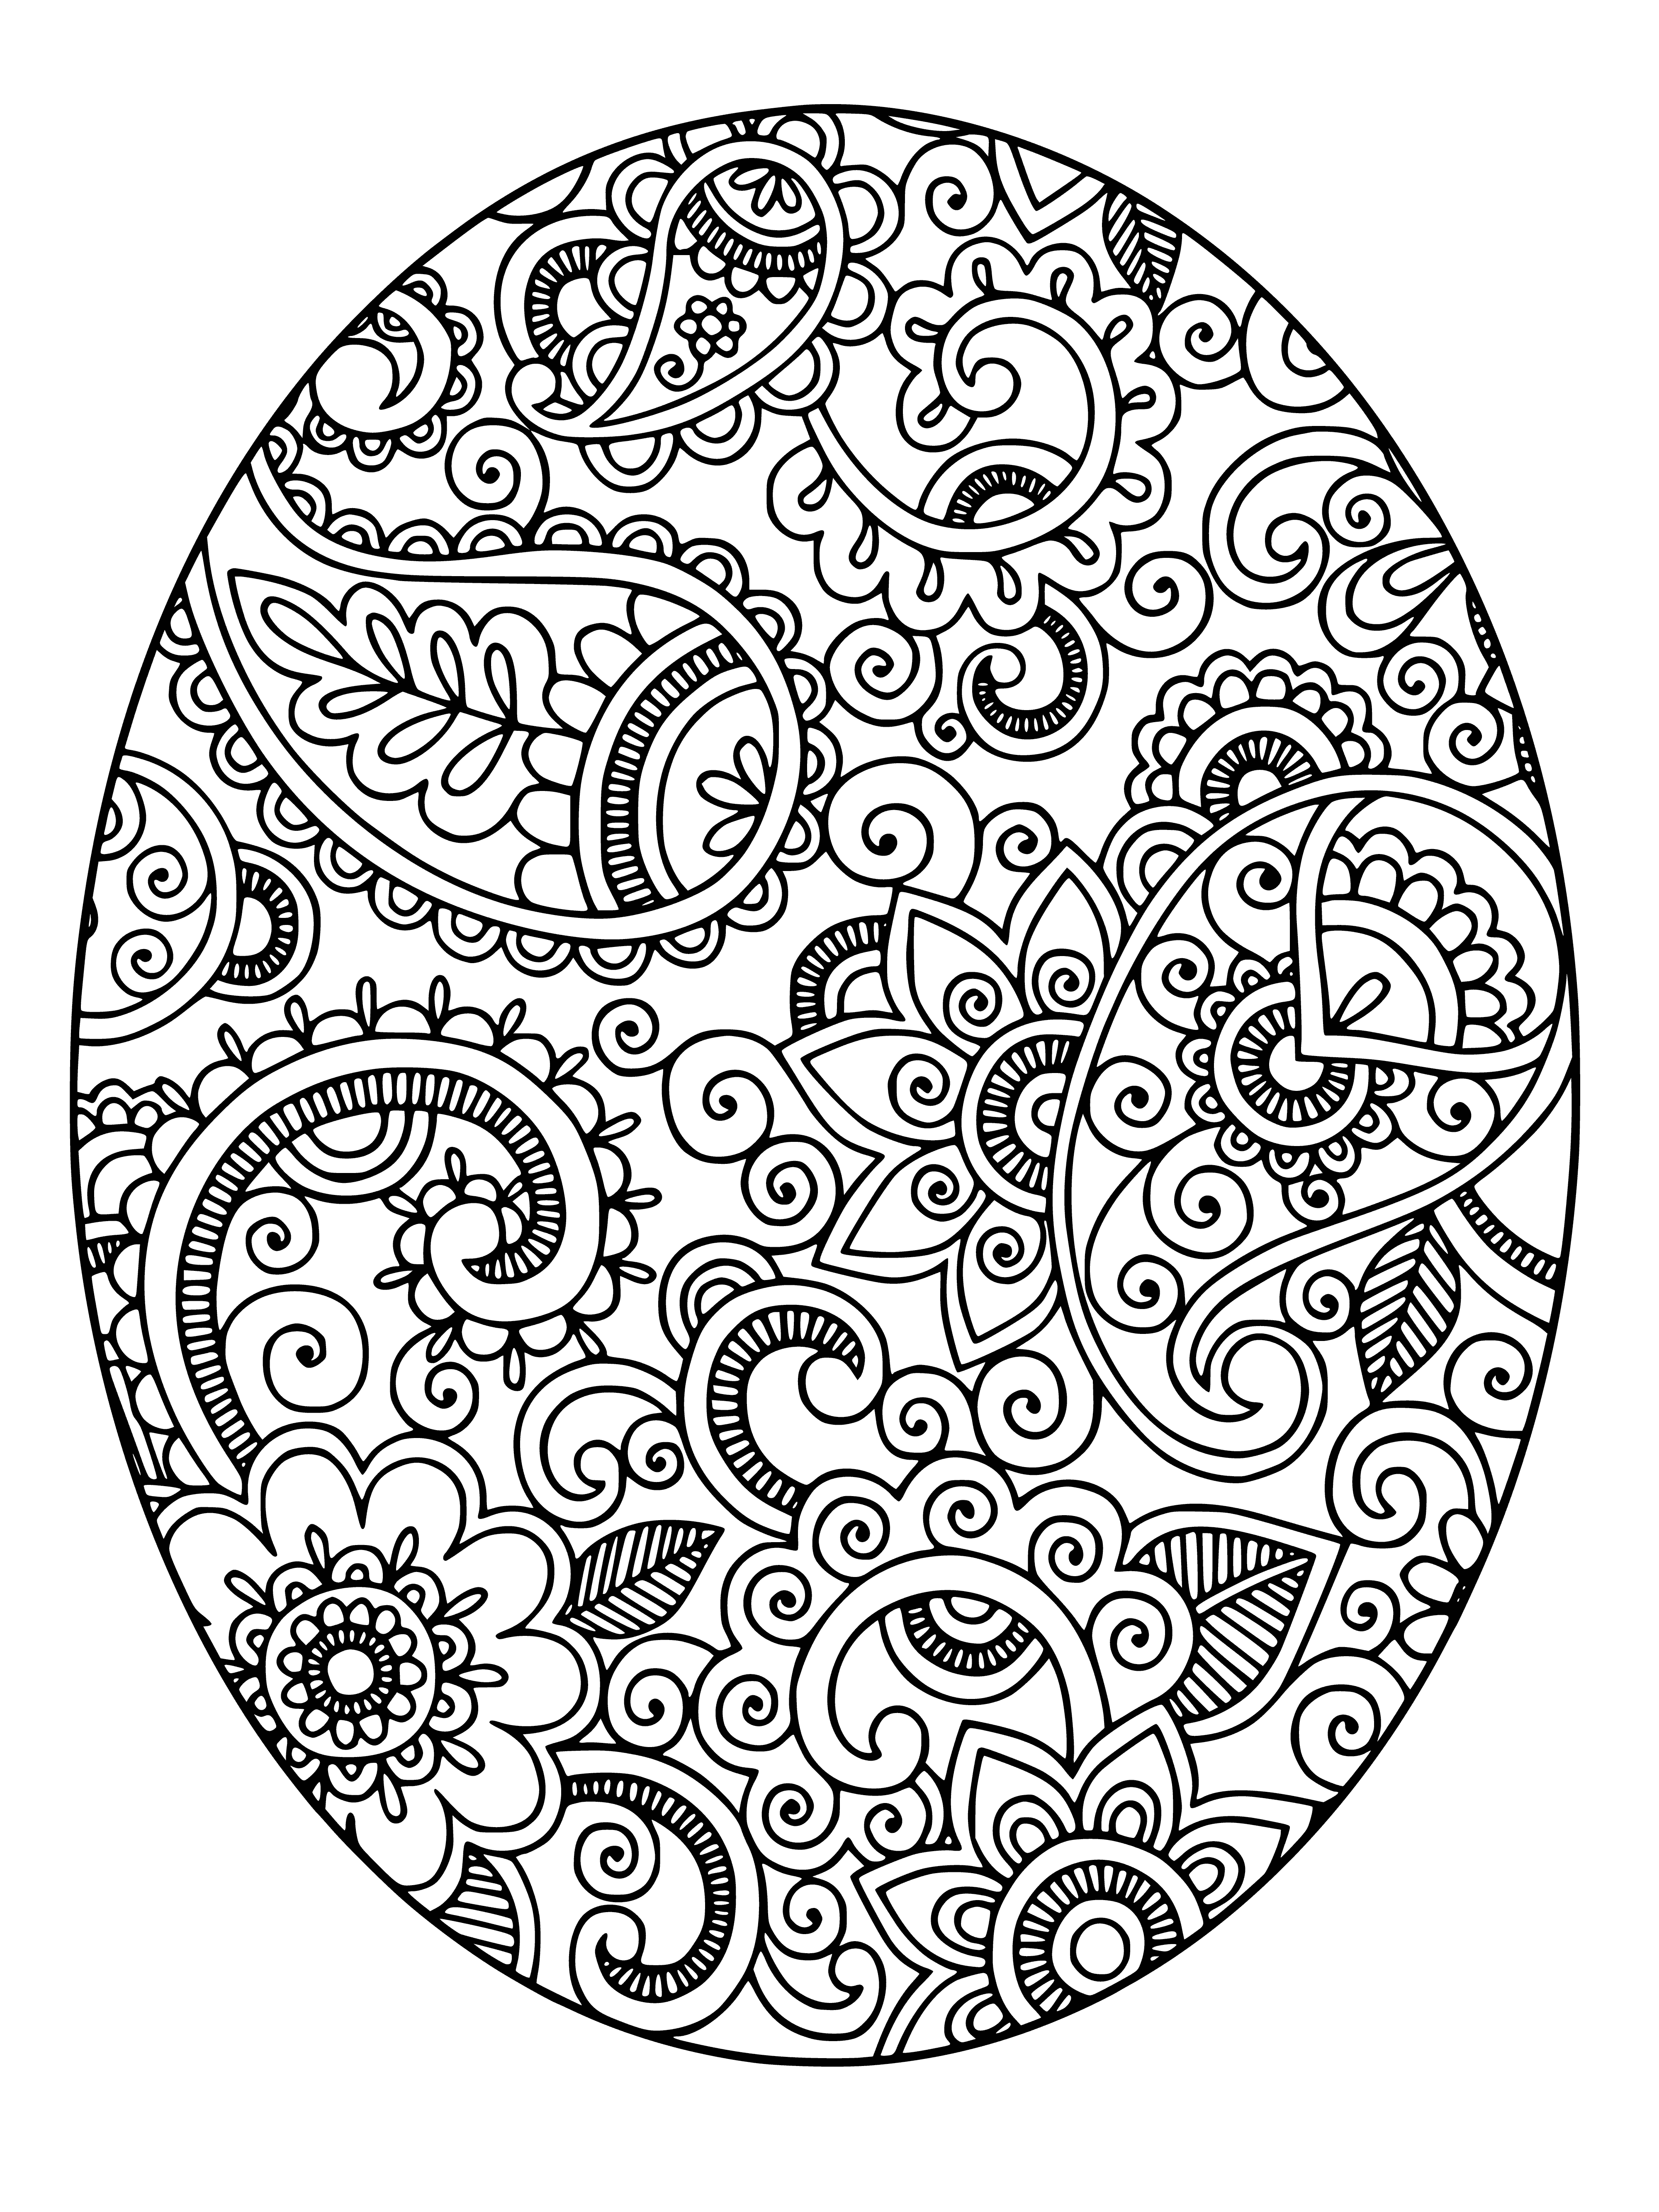 Easter eggs coloring page